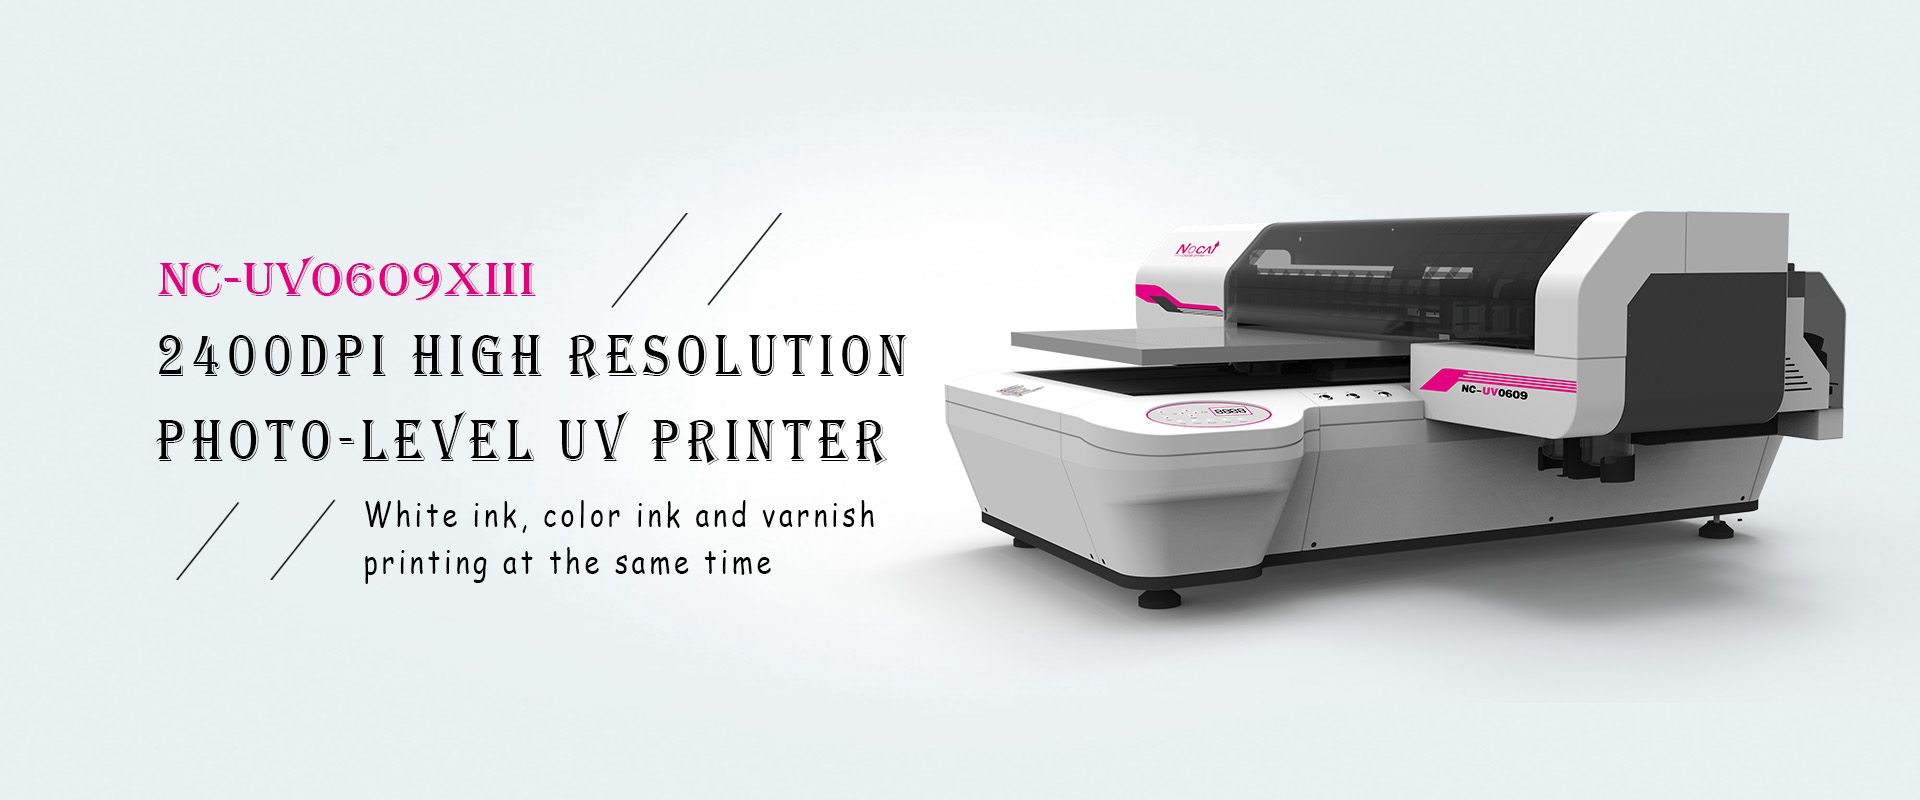 A1 UV printer with dual heads and varnish